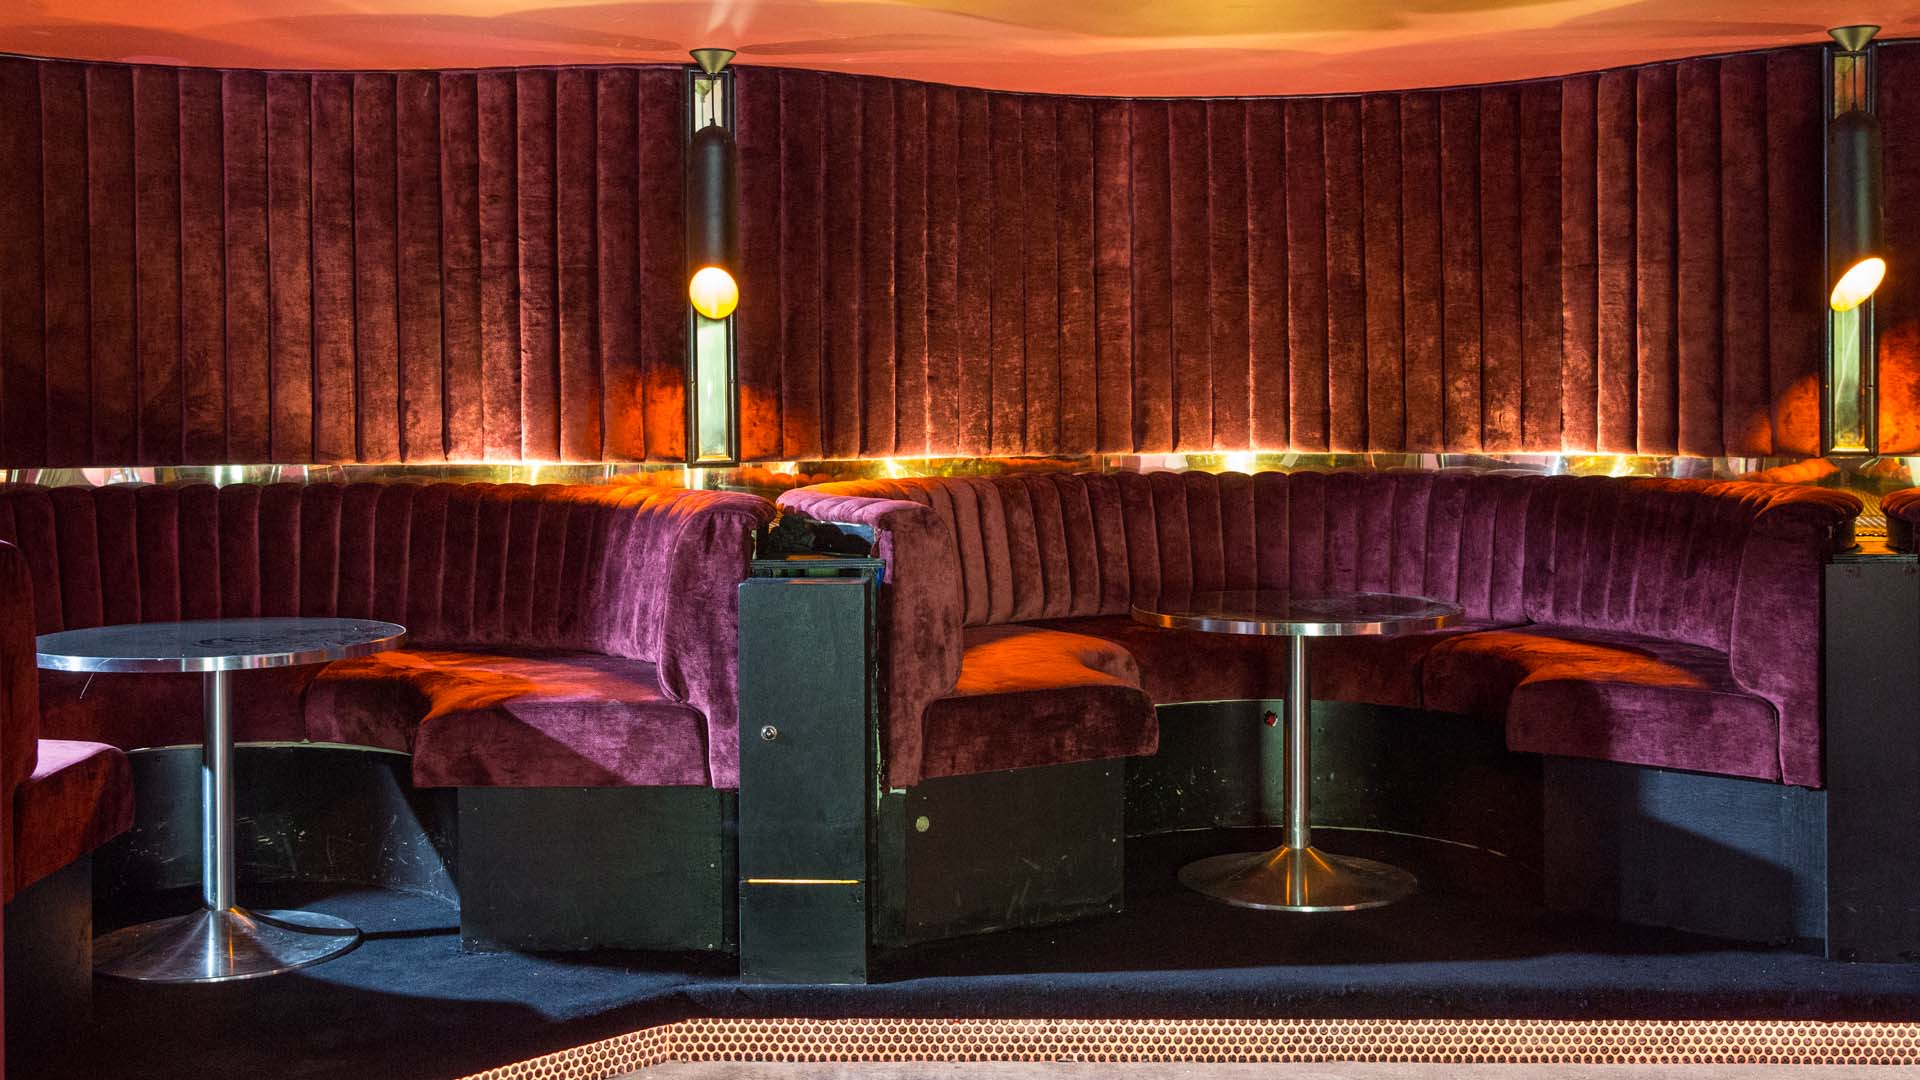 A First Look Inside Kings Cross' New Miami-Inspired Flamingo Lounge